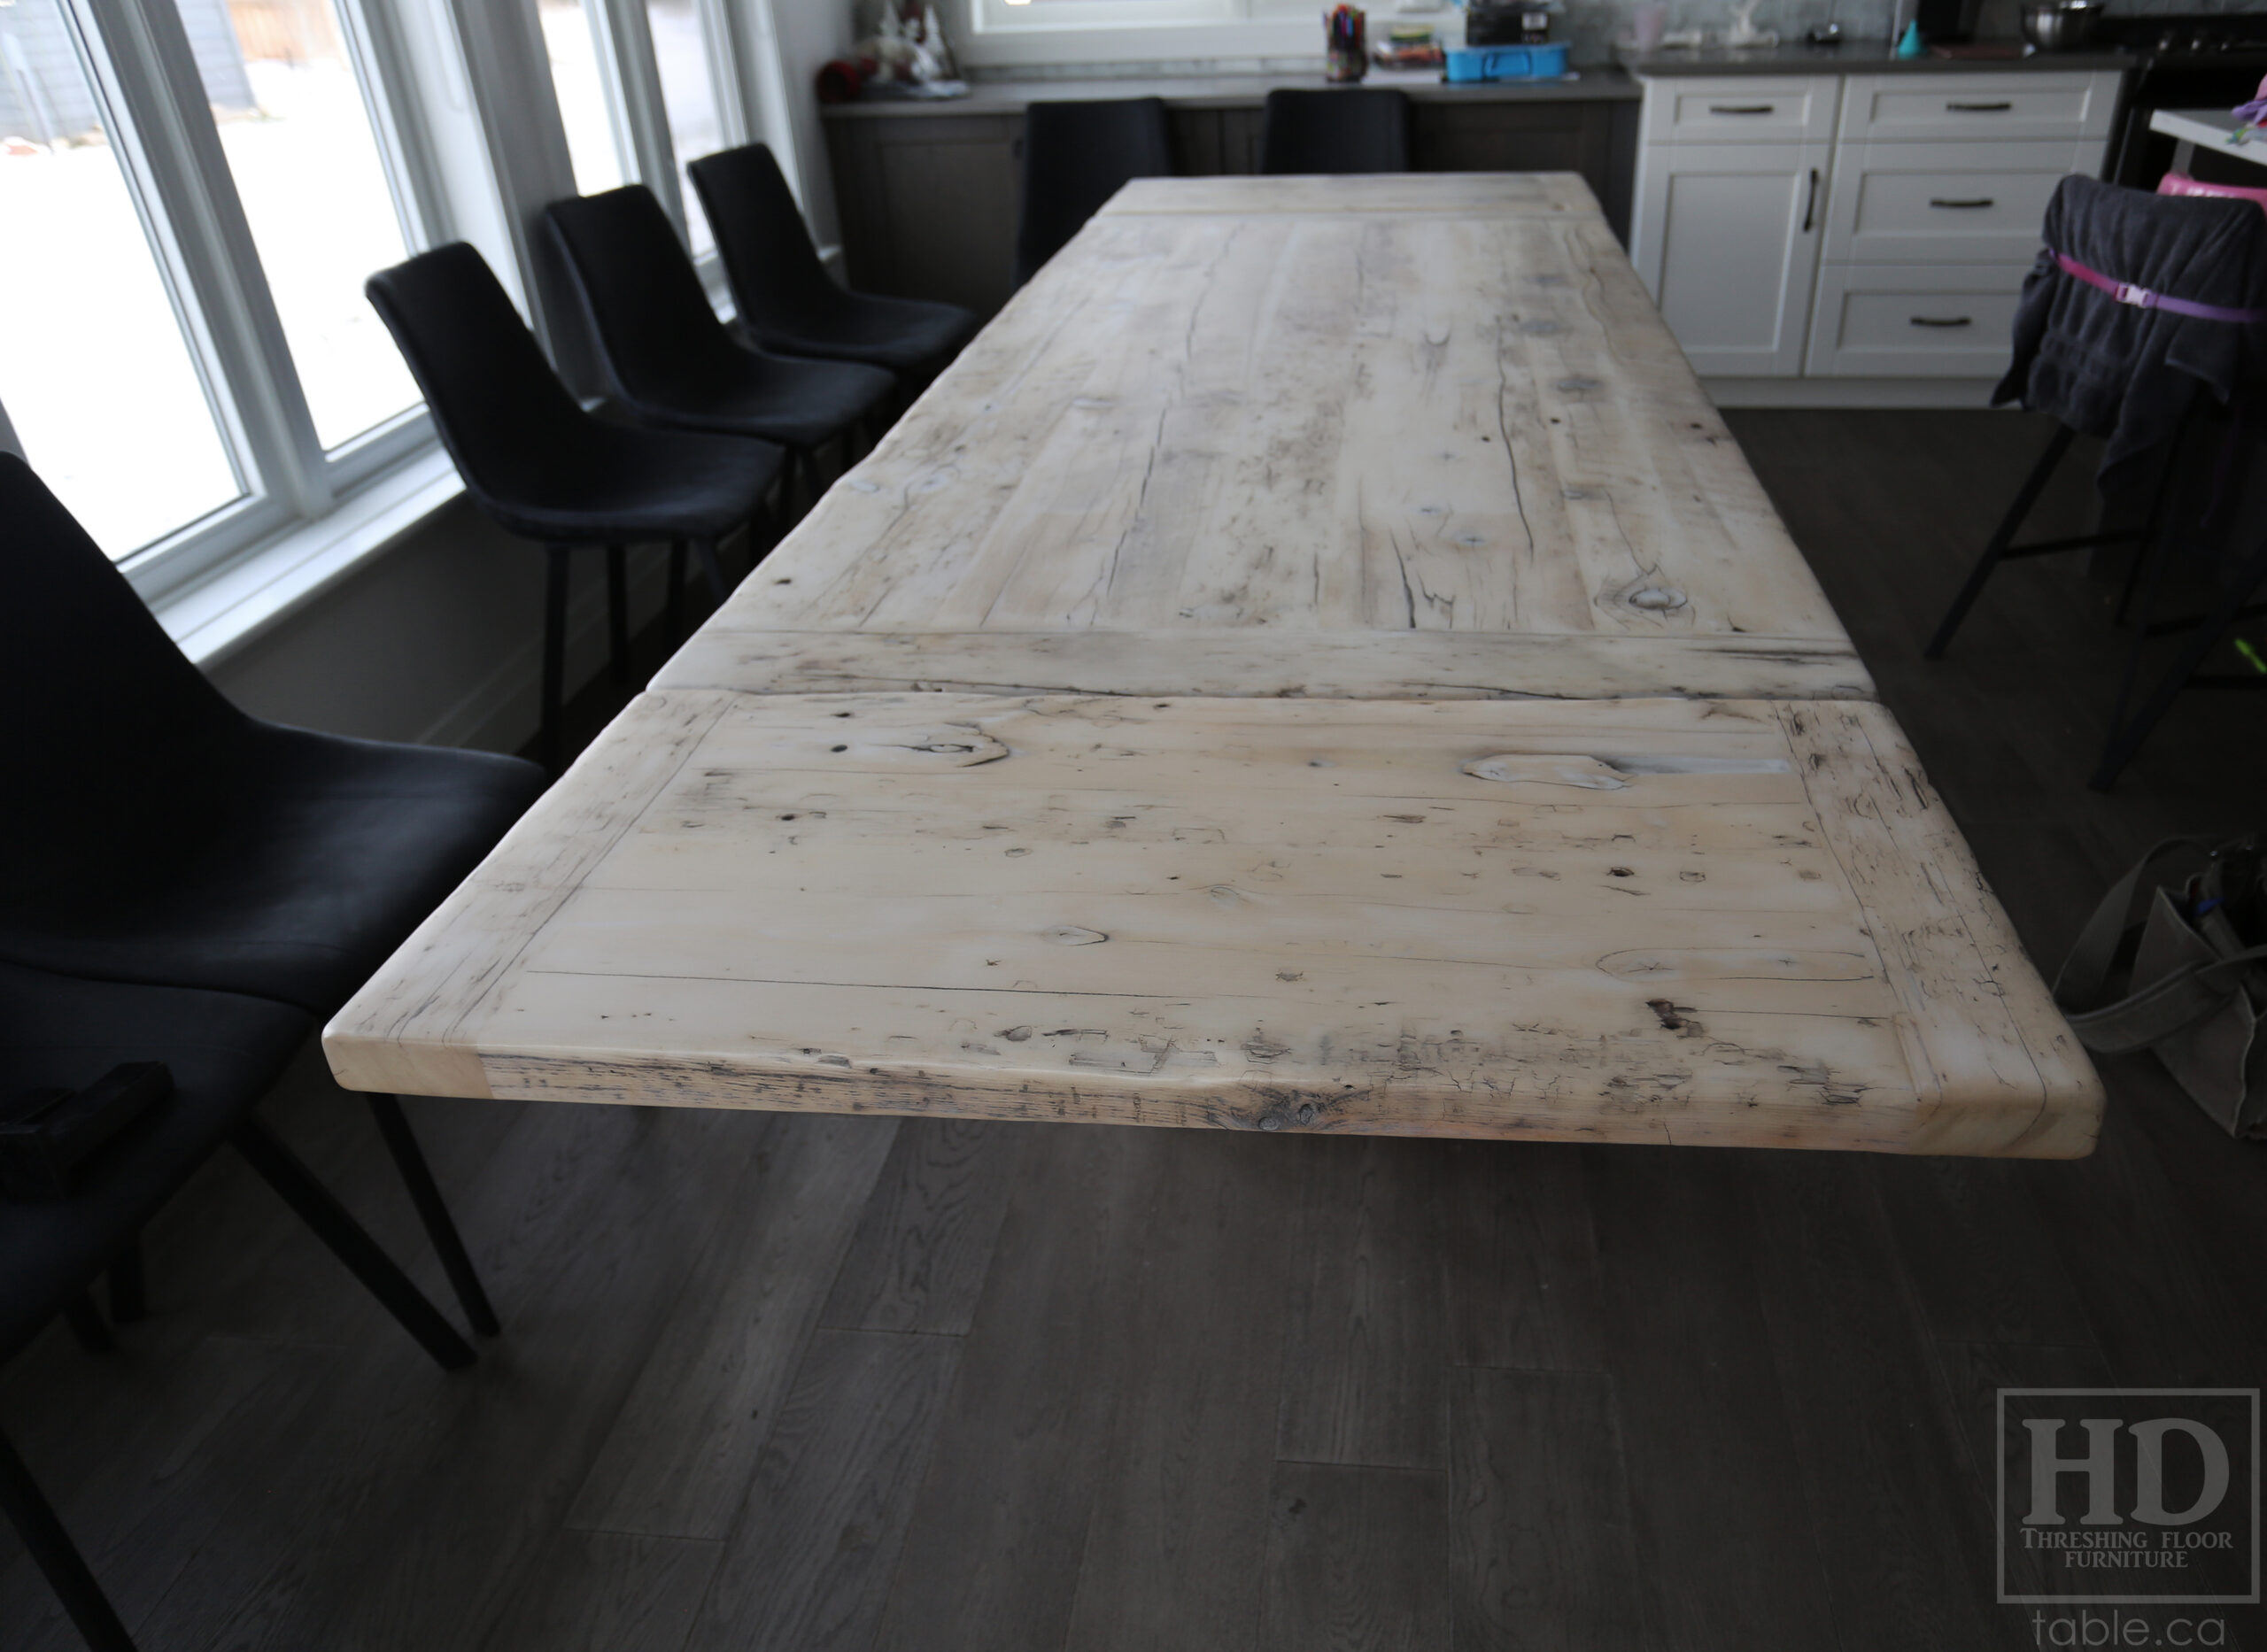 7’ Reclaimed Ontario Barnwood Table we made for a Kingsville, Ontario home – 39” wide – Modern Plank Base - Old Growth Hemlock Threshing Floor Construction – Bleached Option  - Original edges & distressing maintained – Bread Edge Ends - Premium epoxy + matte polyurethane finish – Two 18” Leaf Extensions - www.table.ca